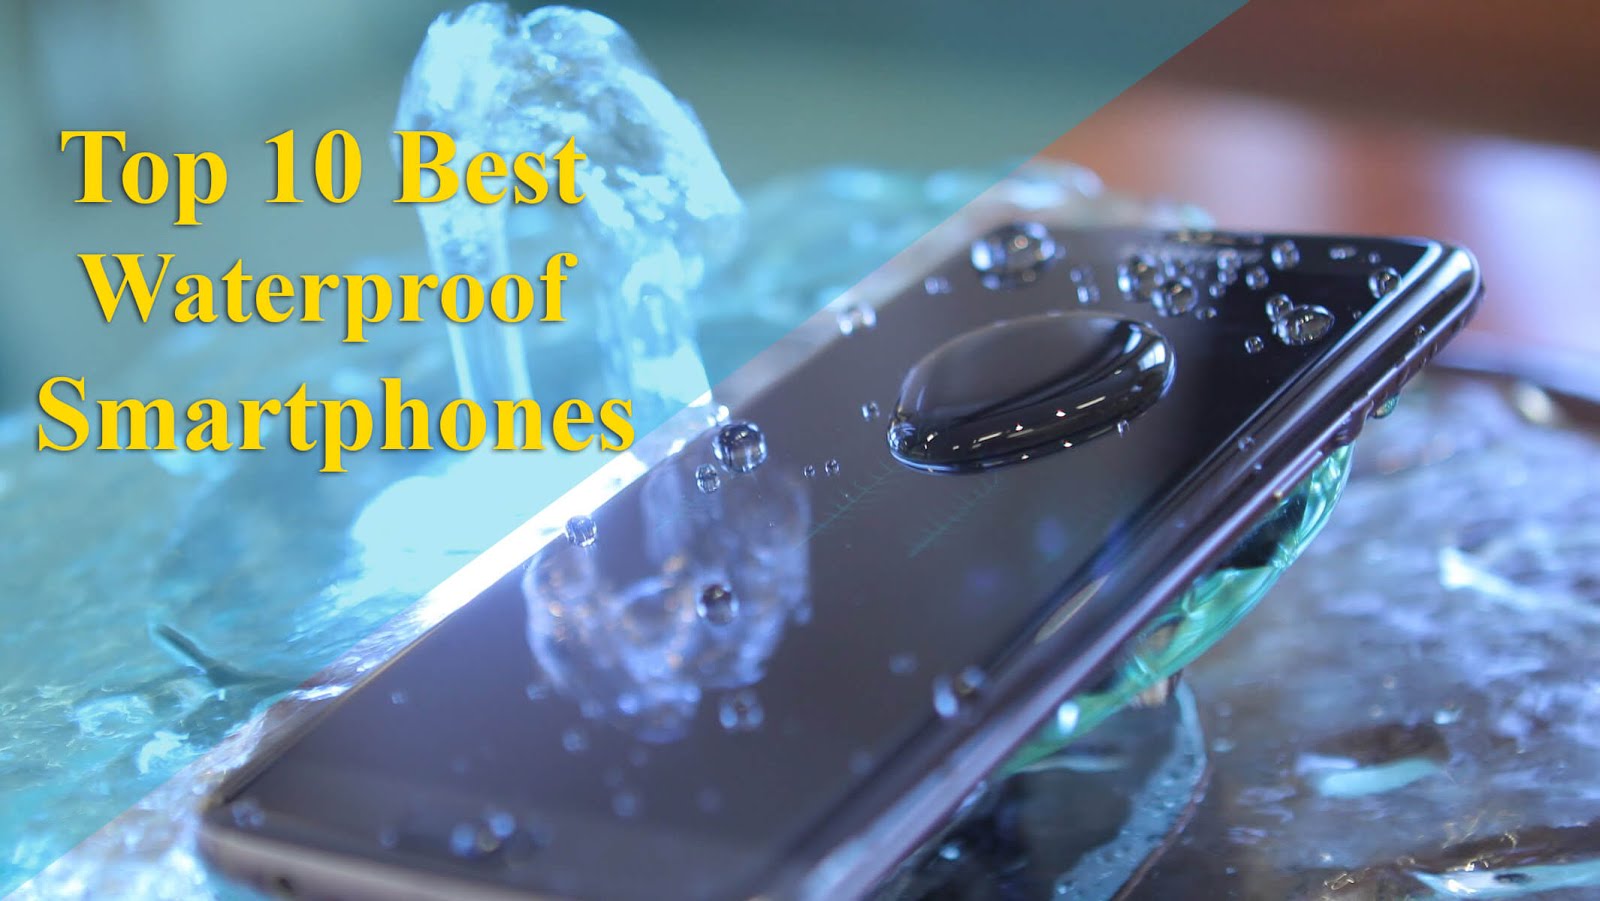 Top 5 Waterproof Smartphones in India - Samsung Galaxy S21 Ultra S21, iPhone 13 Pro Max and More | Best Waterproof Smartphones in India Price, Specification, Features